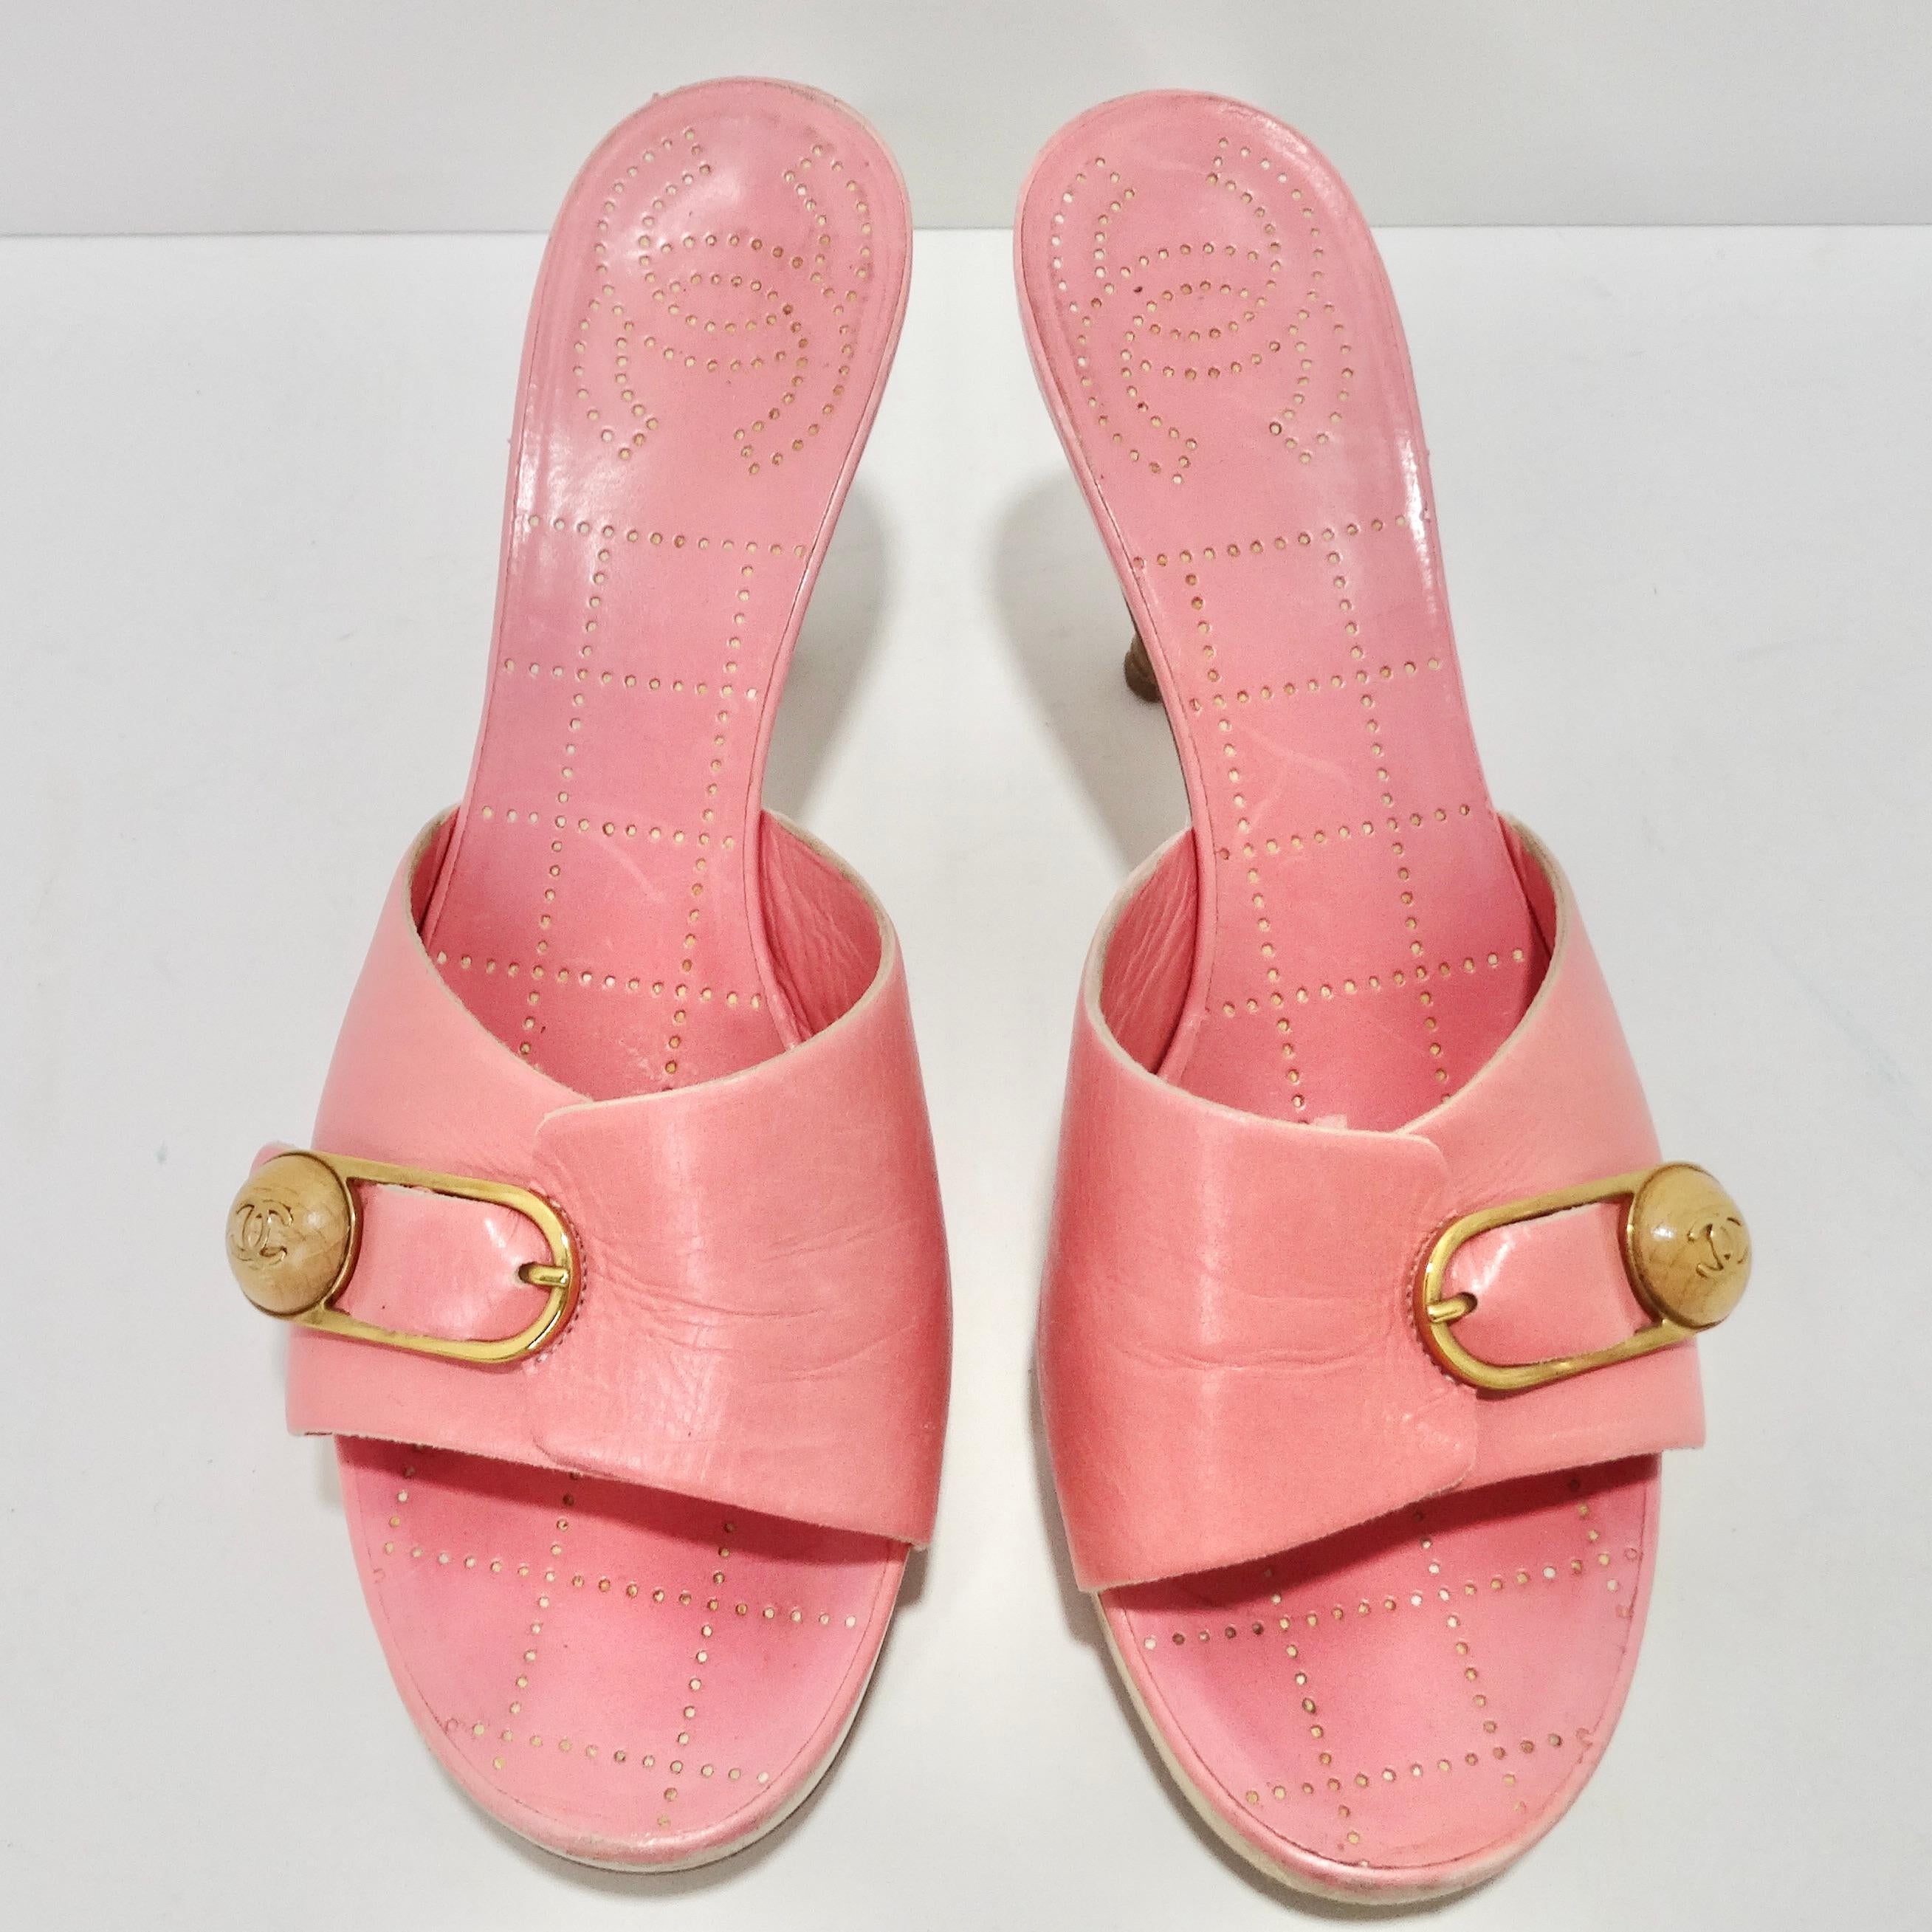 Chanel Red Canvas CC Wedge Slide Sandals Size 38.5